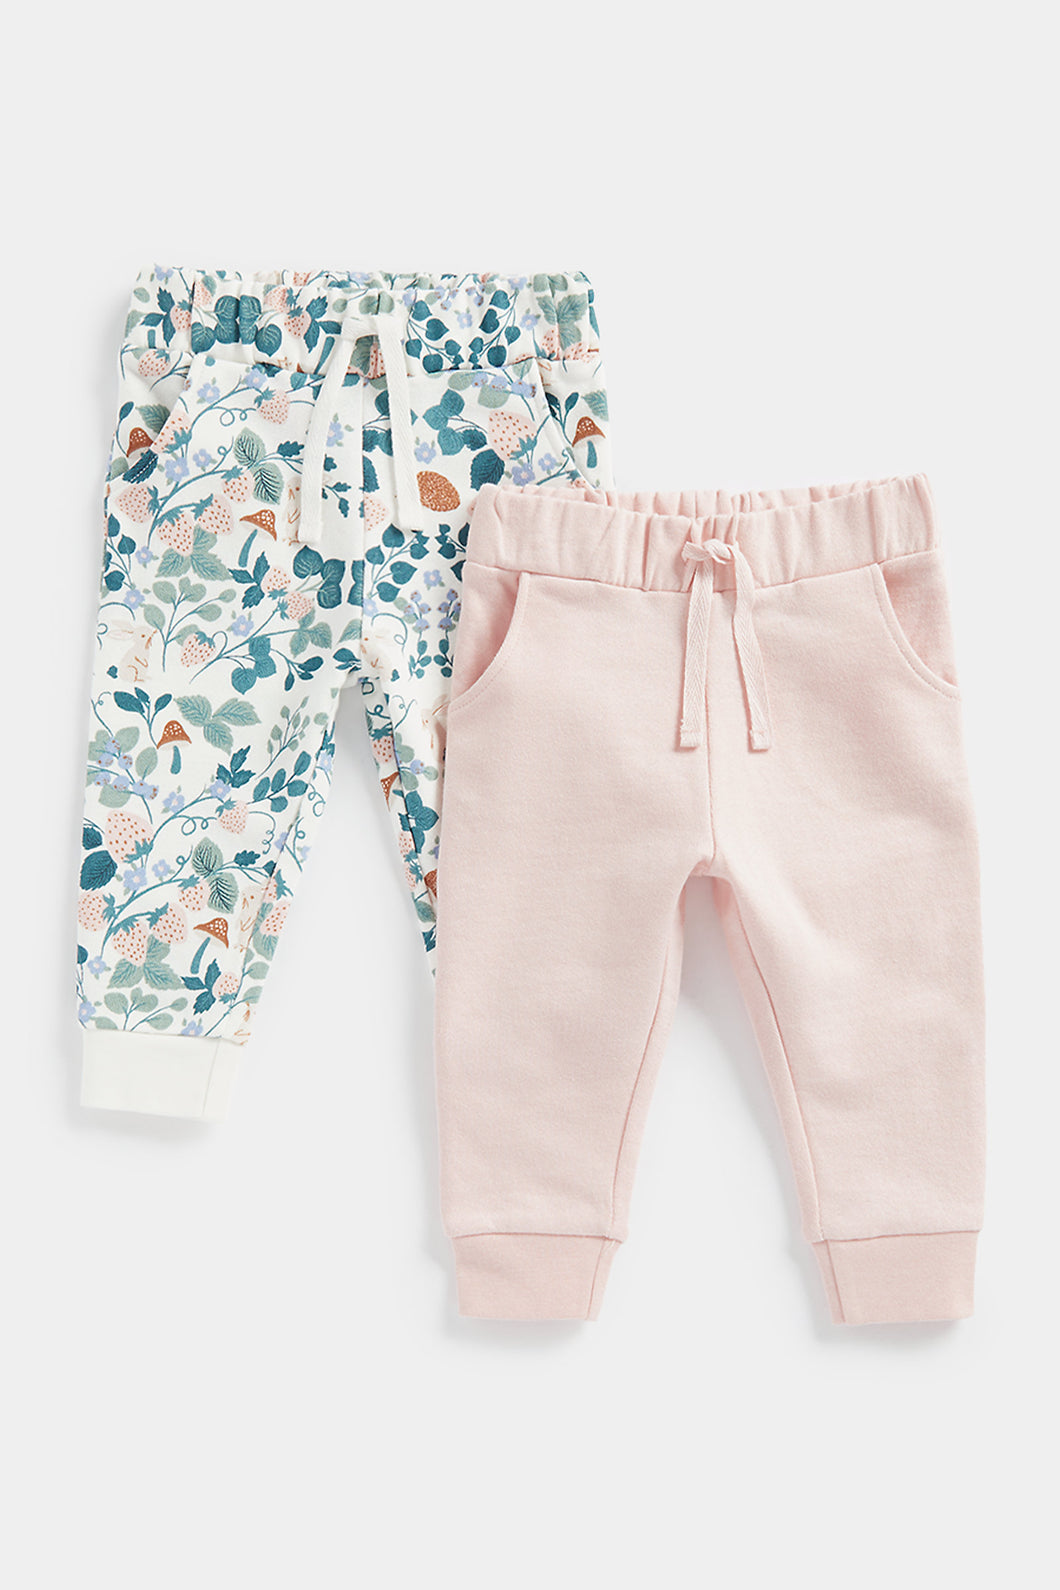 Mothercare Pink and Floral Joggers - 2 Pack